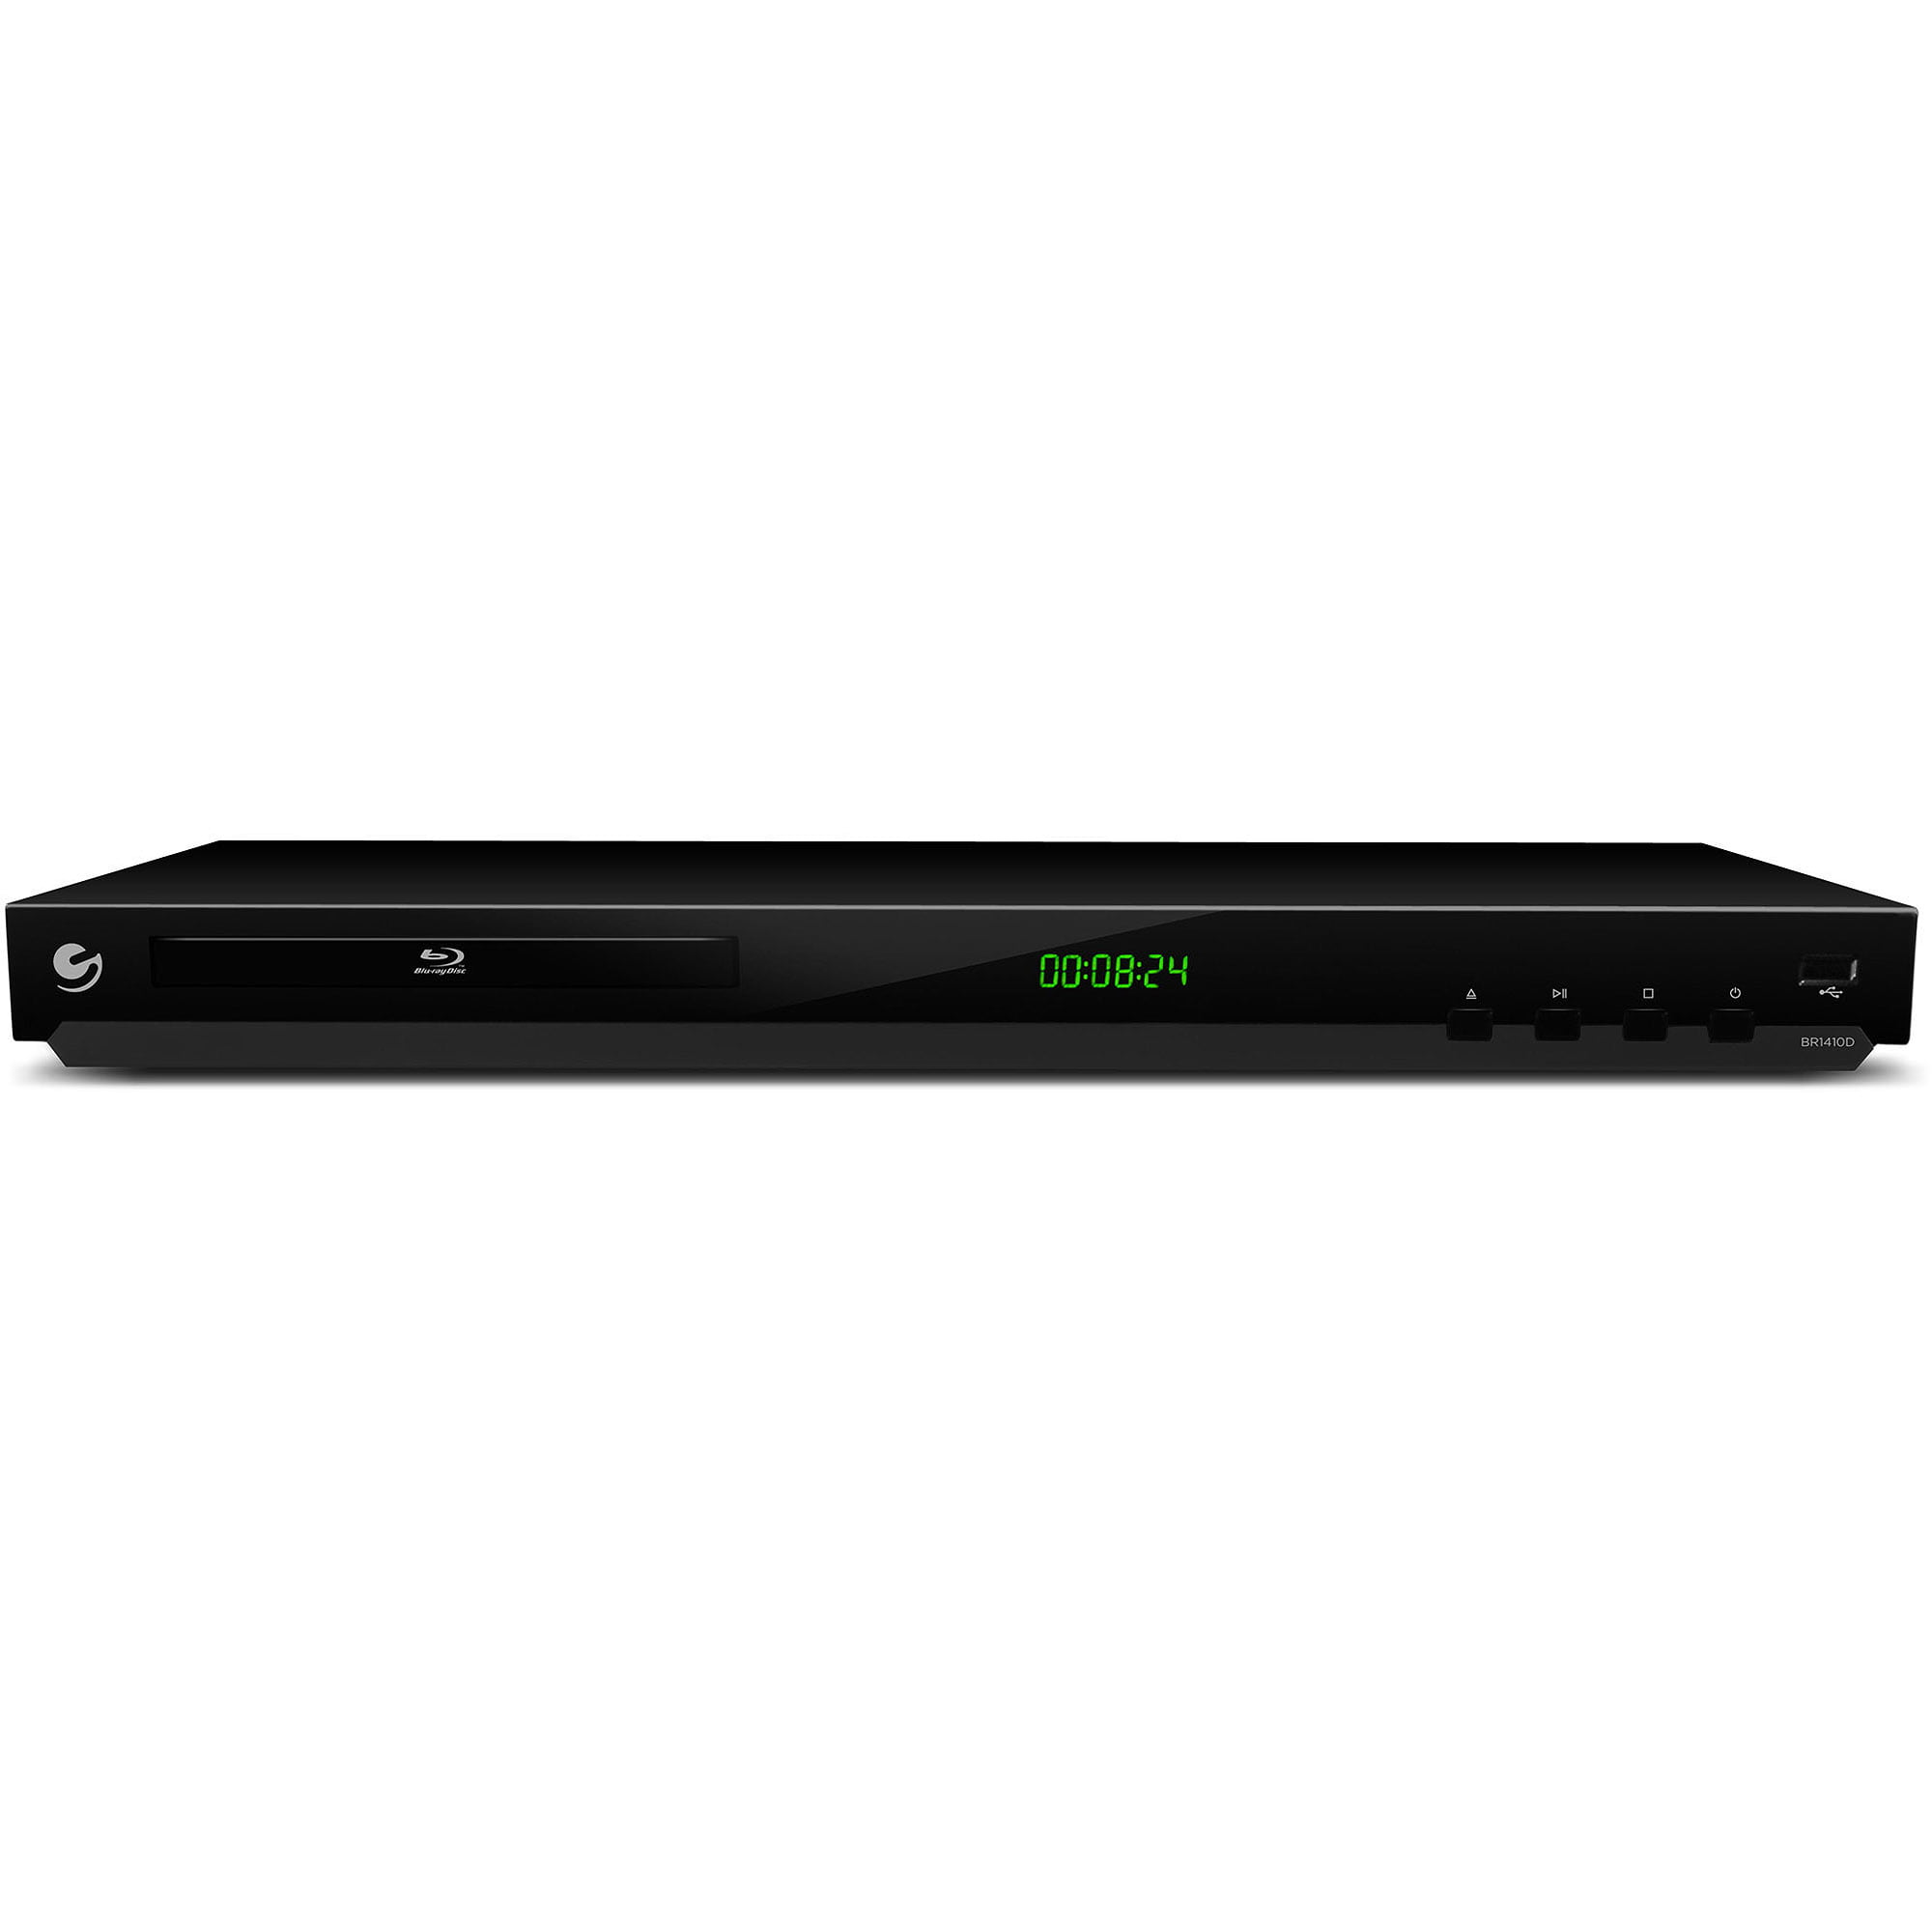 Ematic Blu Ray Player With 4k Upscaling And Blu Ray 3d Walmart Com Walmart Com